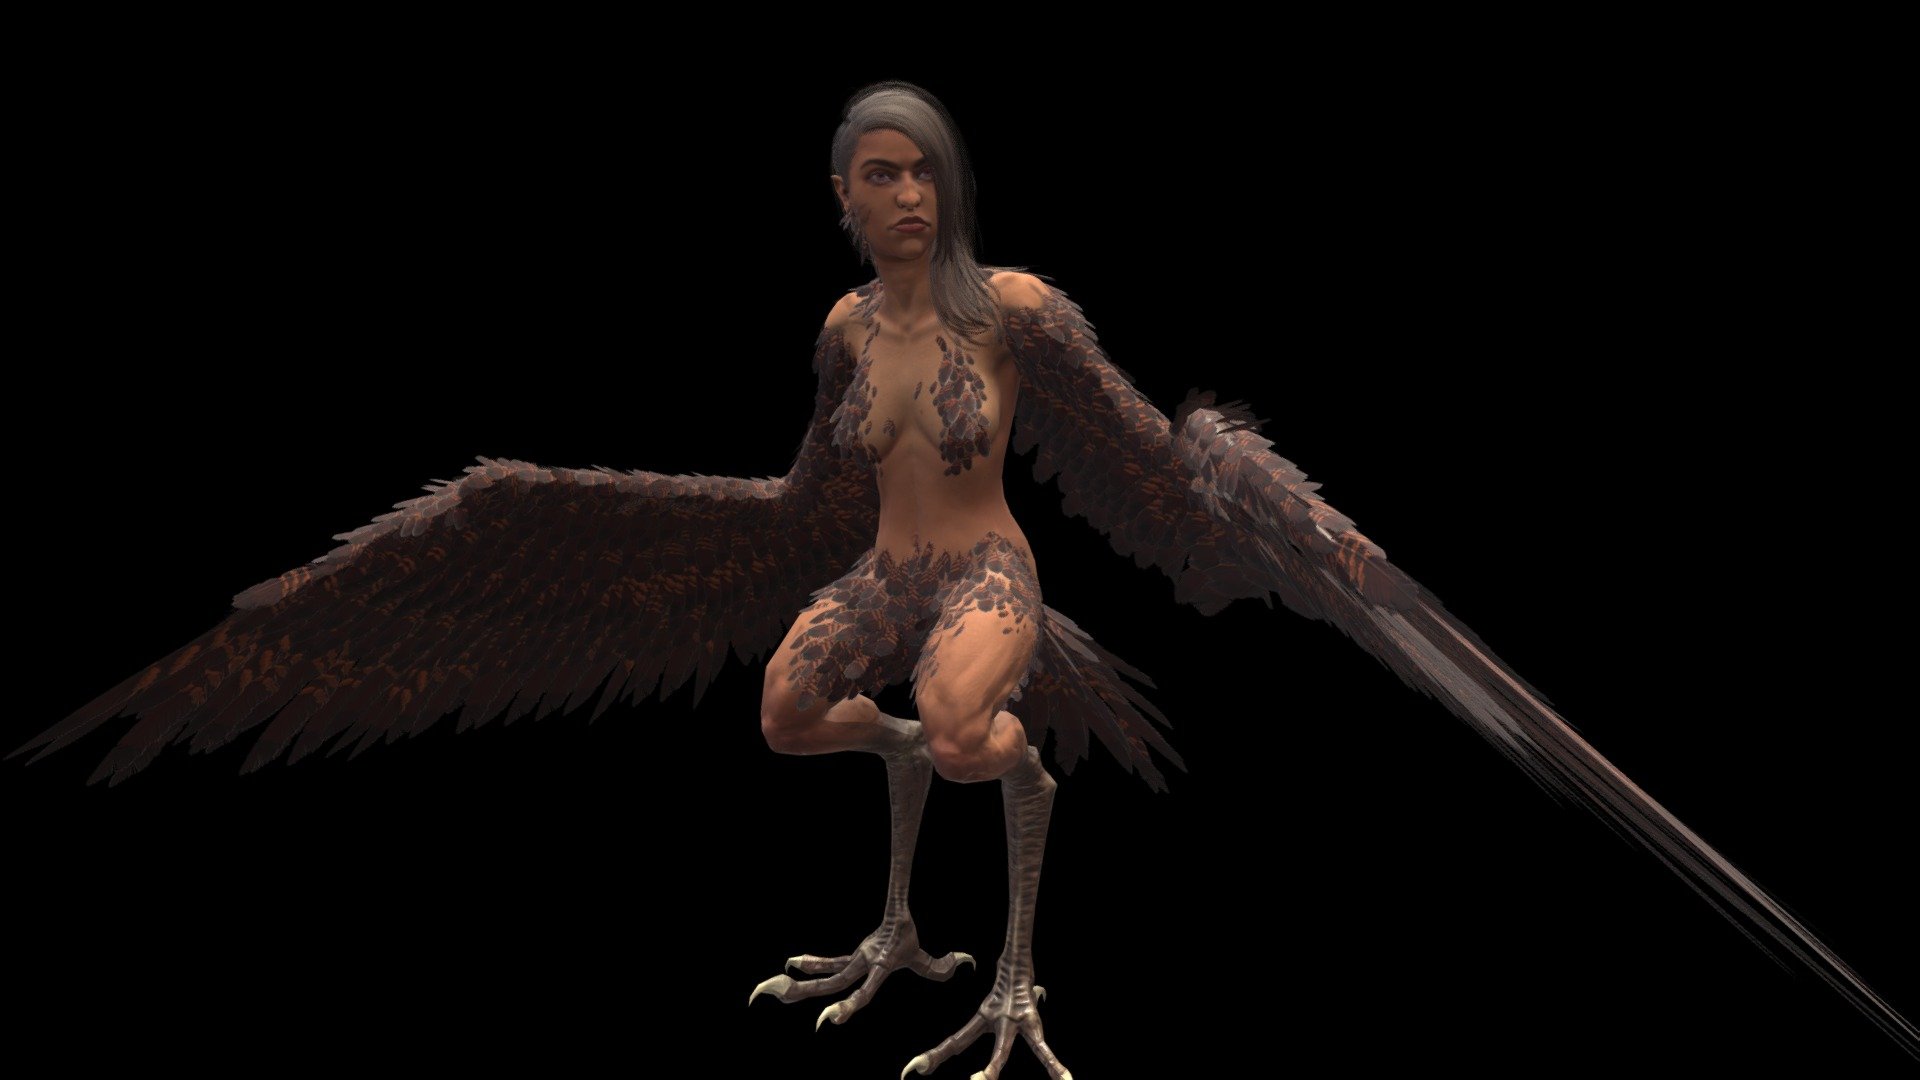 Low-poly model of the character Harpy
Suitable for games of different genre: RPG, strategy, first-person shooter, etc.
In the archive, the basic mesh (fbx and maya)

Textures pack map 4096x4096 and 2048 support 512
four skins 
materials 20
textures 42

In the model it is desirable to use a shader with a two-sided display of polygons.

The model contains 25 animations
attack (x4)
Straif LR (x2)
idle (x3)
death (x3)
gethit(x5)
other actions
strafe move block (x9)

faces 18624
verts 33246
tris 33598

Support me on patreon, and get access to unique content and other cool events patreon.com/dremorn
naked skin and unique skin with body jewelry awaits you 

And also subscribe to my insta, there are a lot of pictures and other cool things 
instagram.com/andrey.panchenko/ - Harpy - 3D model by dremorn 3d model